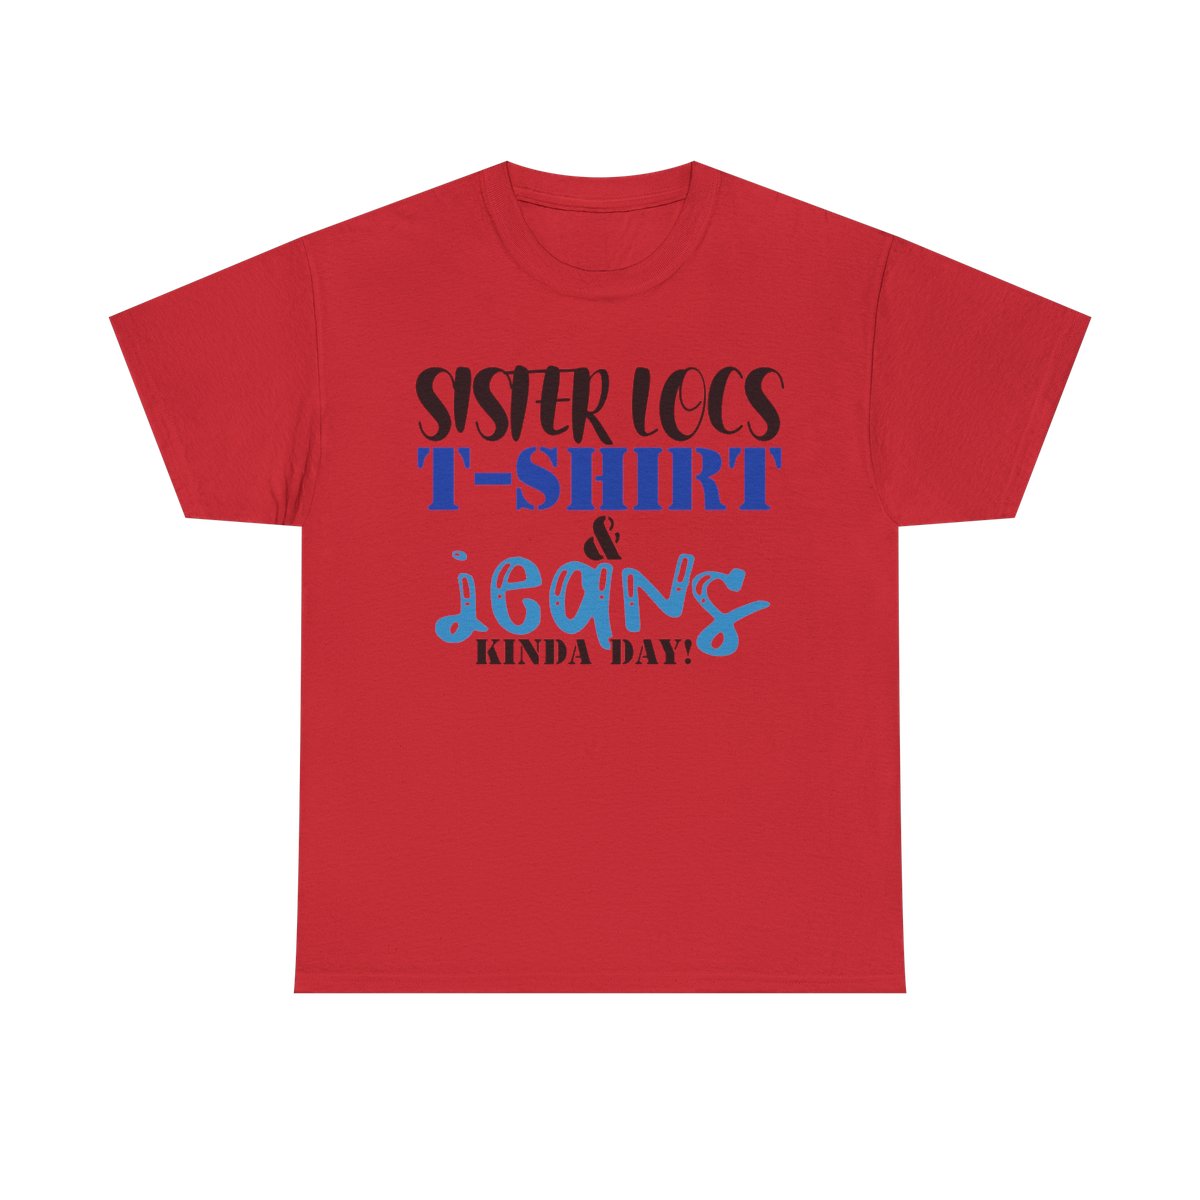 Red casual t-shirt with Sister Locs and Jeans text.